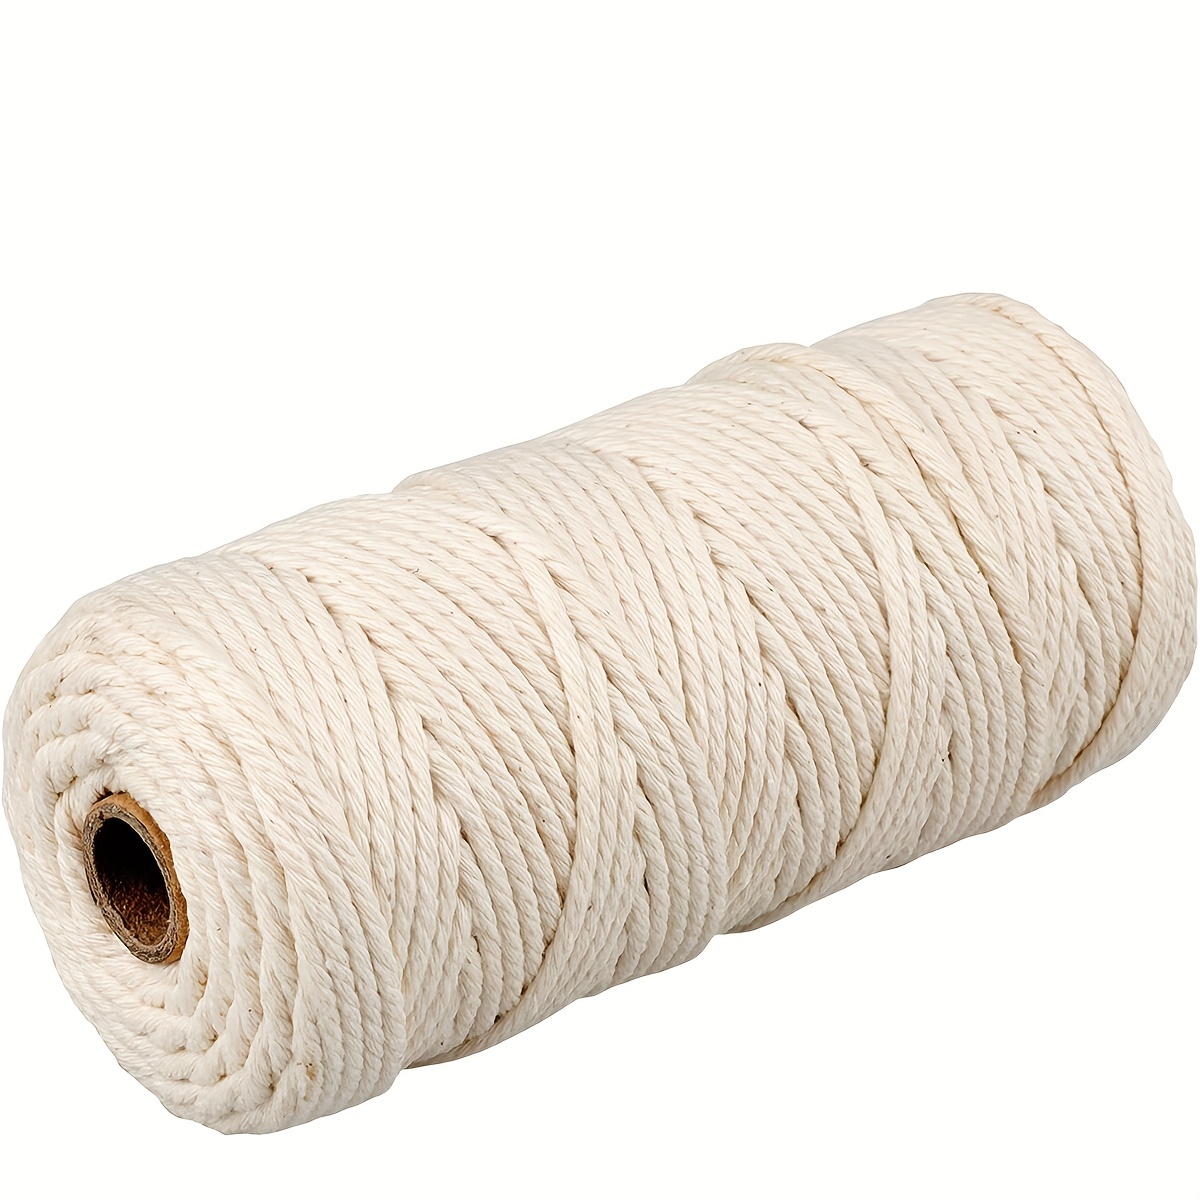 NEW ARRIVALS ] 1 Roll 5mm 100m Natural Jute Twine Thickened Heavy Duty Rope  For Diy Garden Binding Crafts Packaging Material - AliExpress